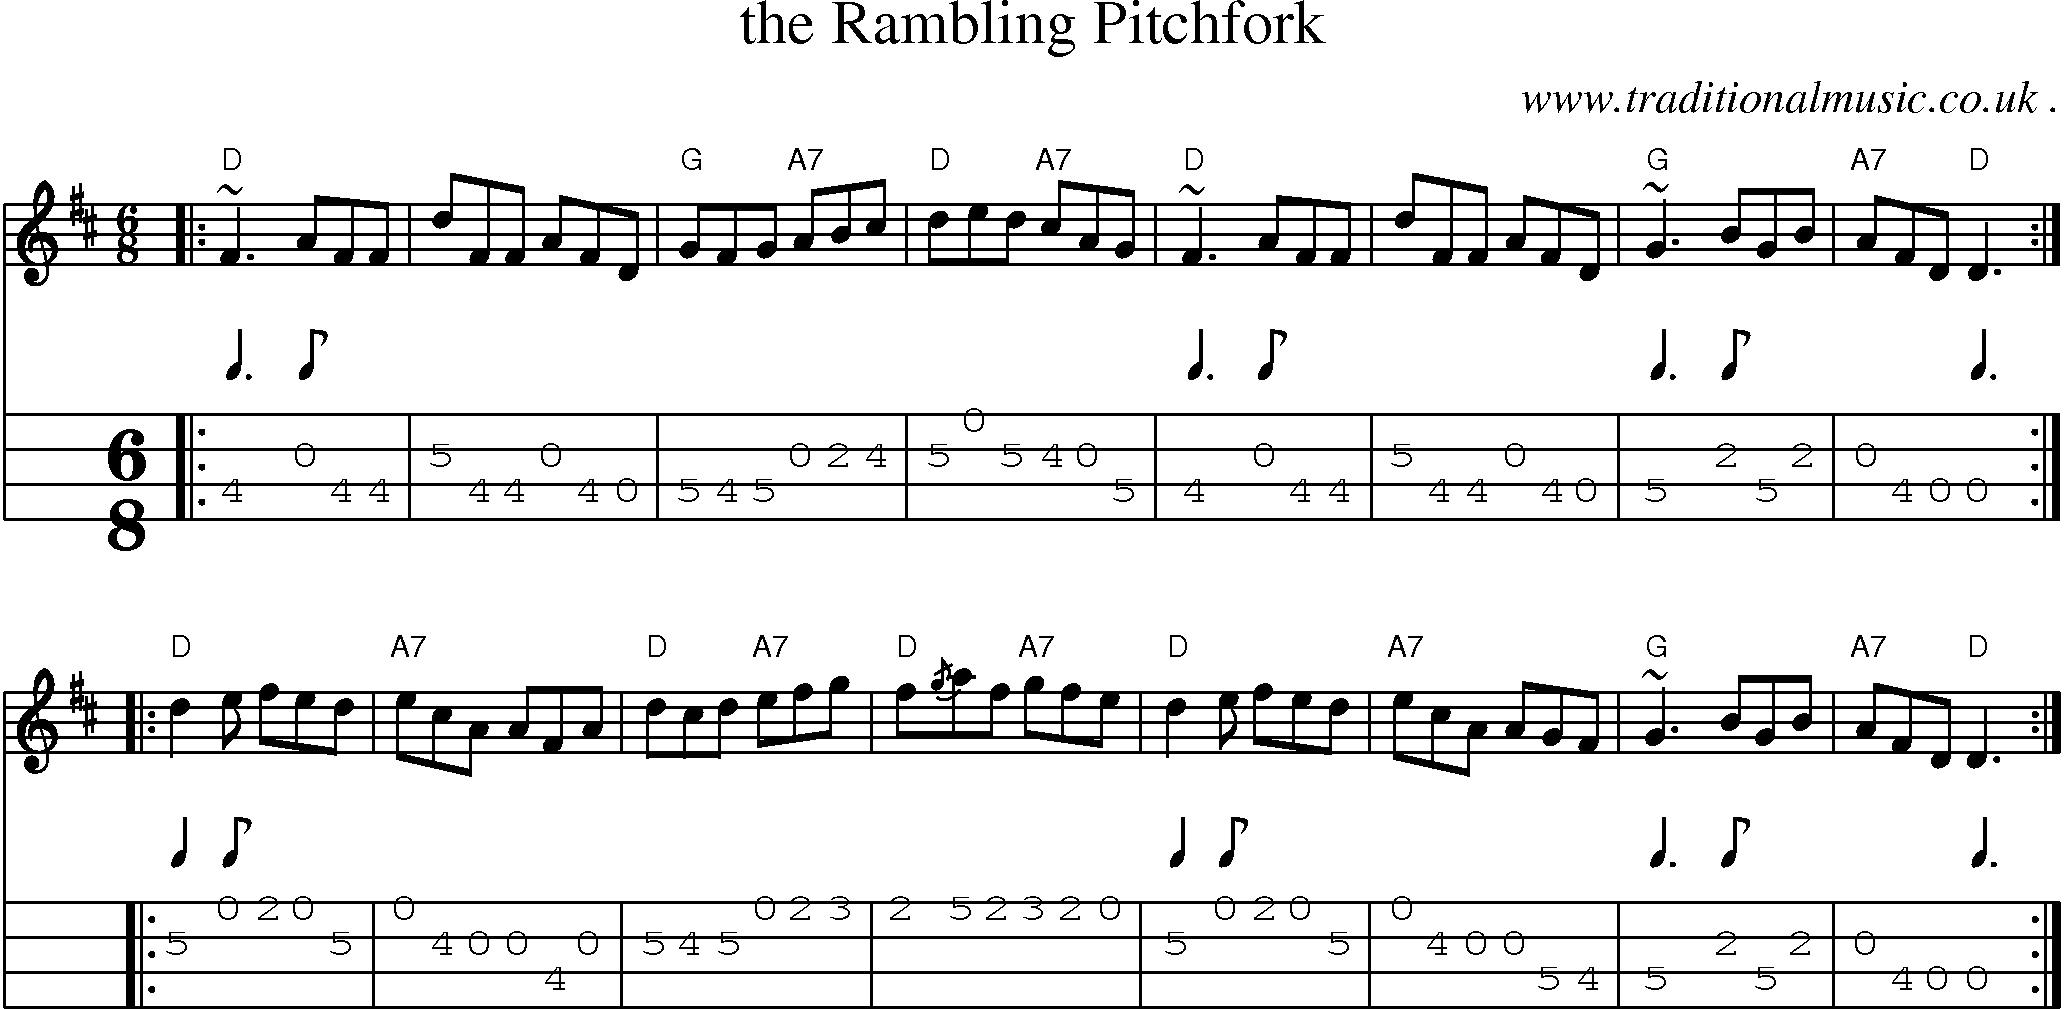 Sheet-music  score, Chords and Mandolin Tabs for The Rambling Pitchfork